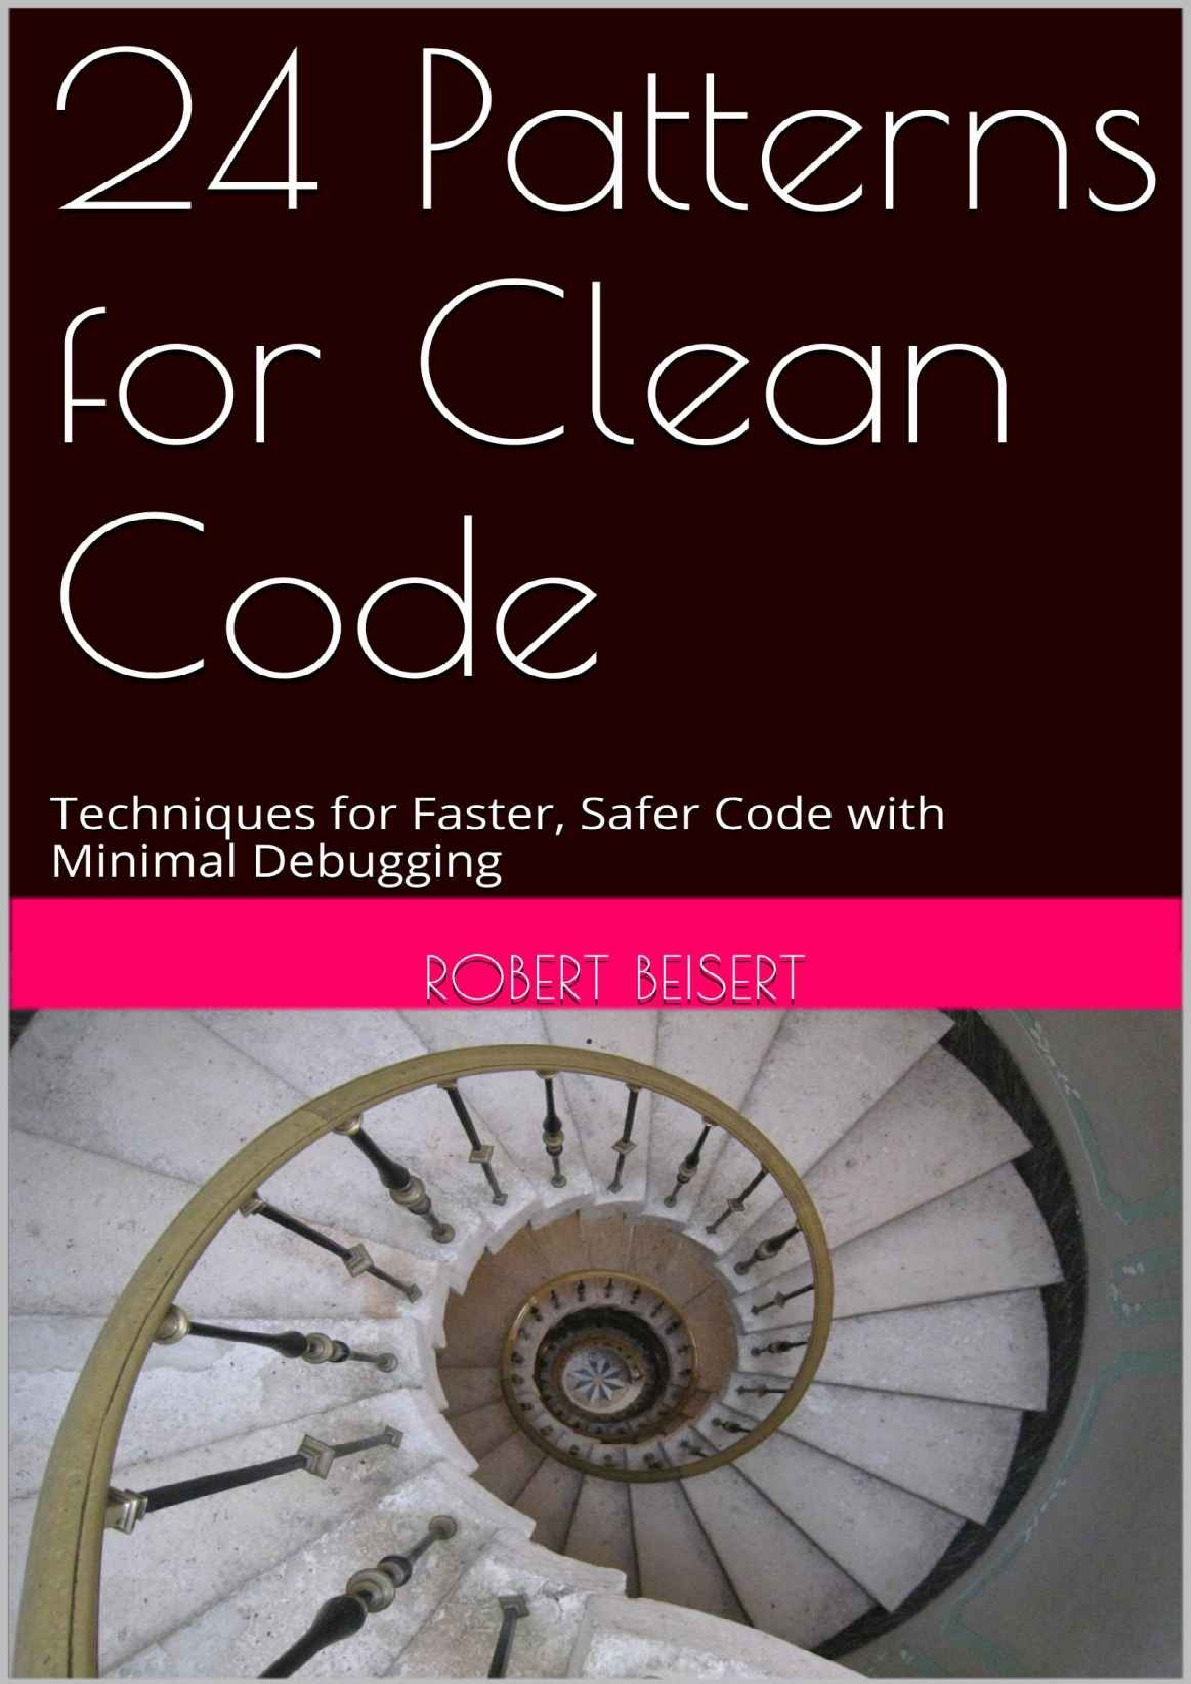 24 Patterns for Clean Code. Techniques for Faster, Safer Code with Minimal Debugging (RobertBeisert) (z-lib.org)